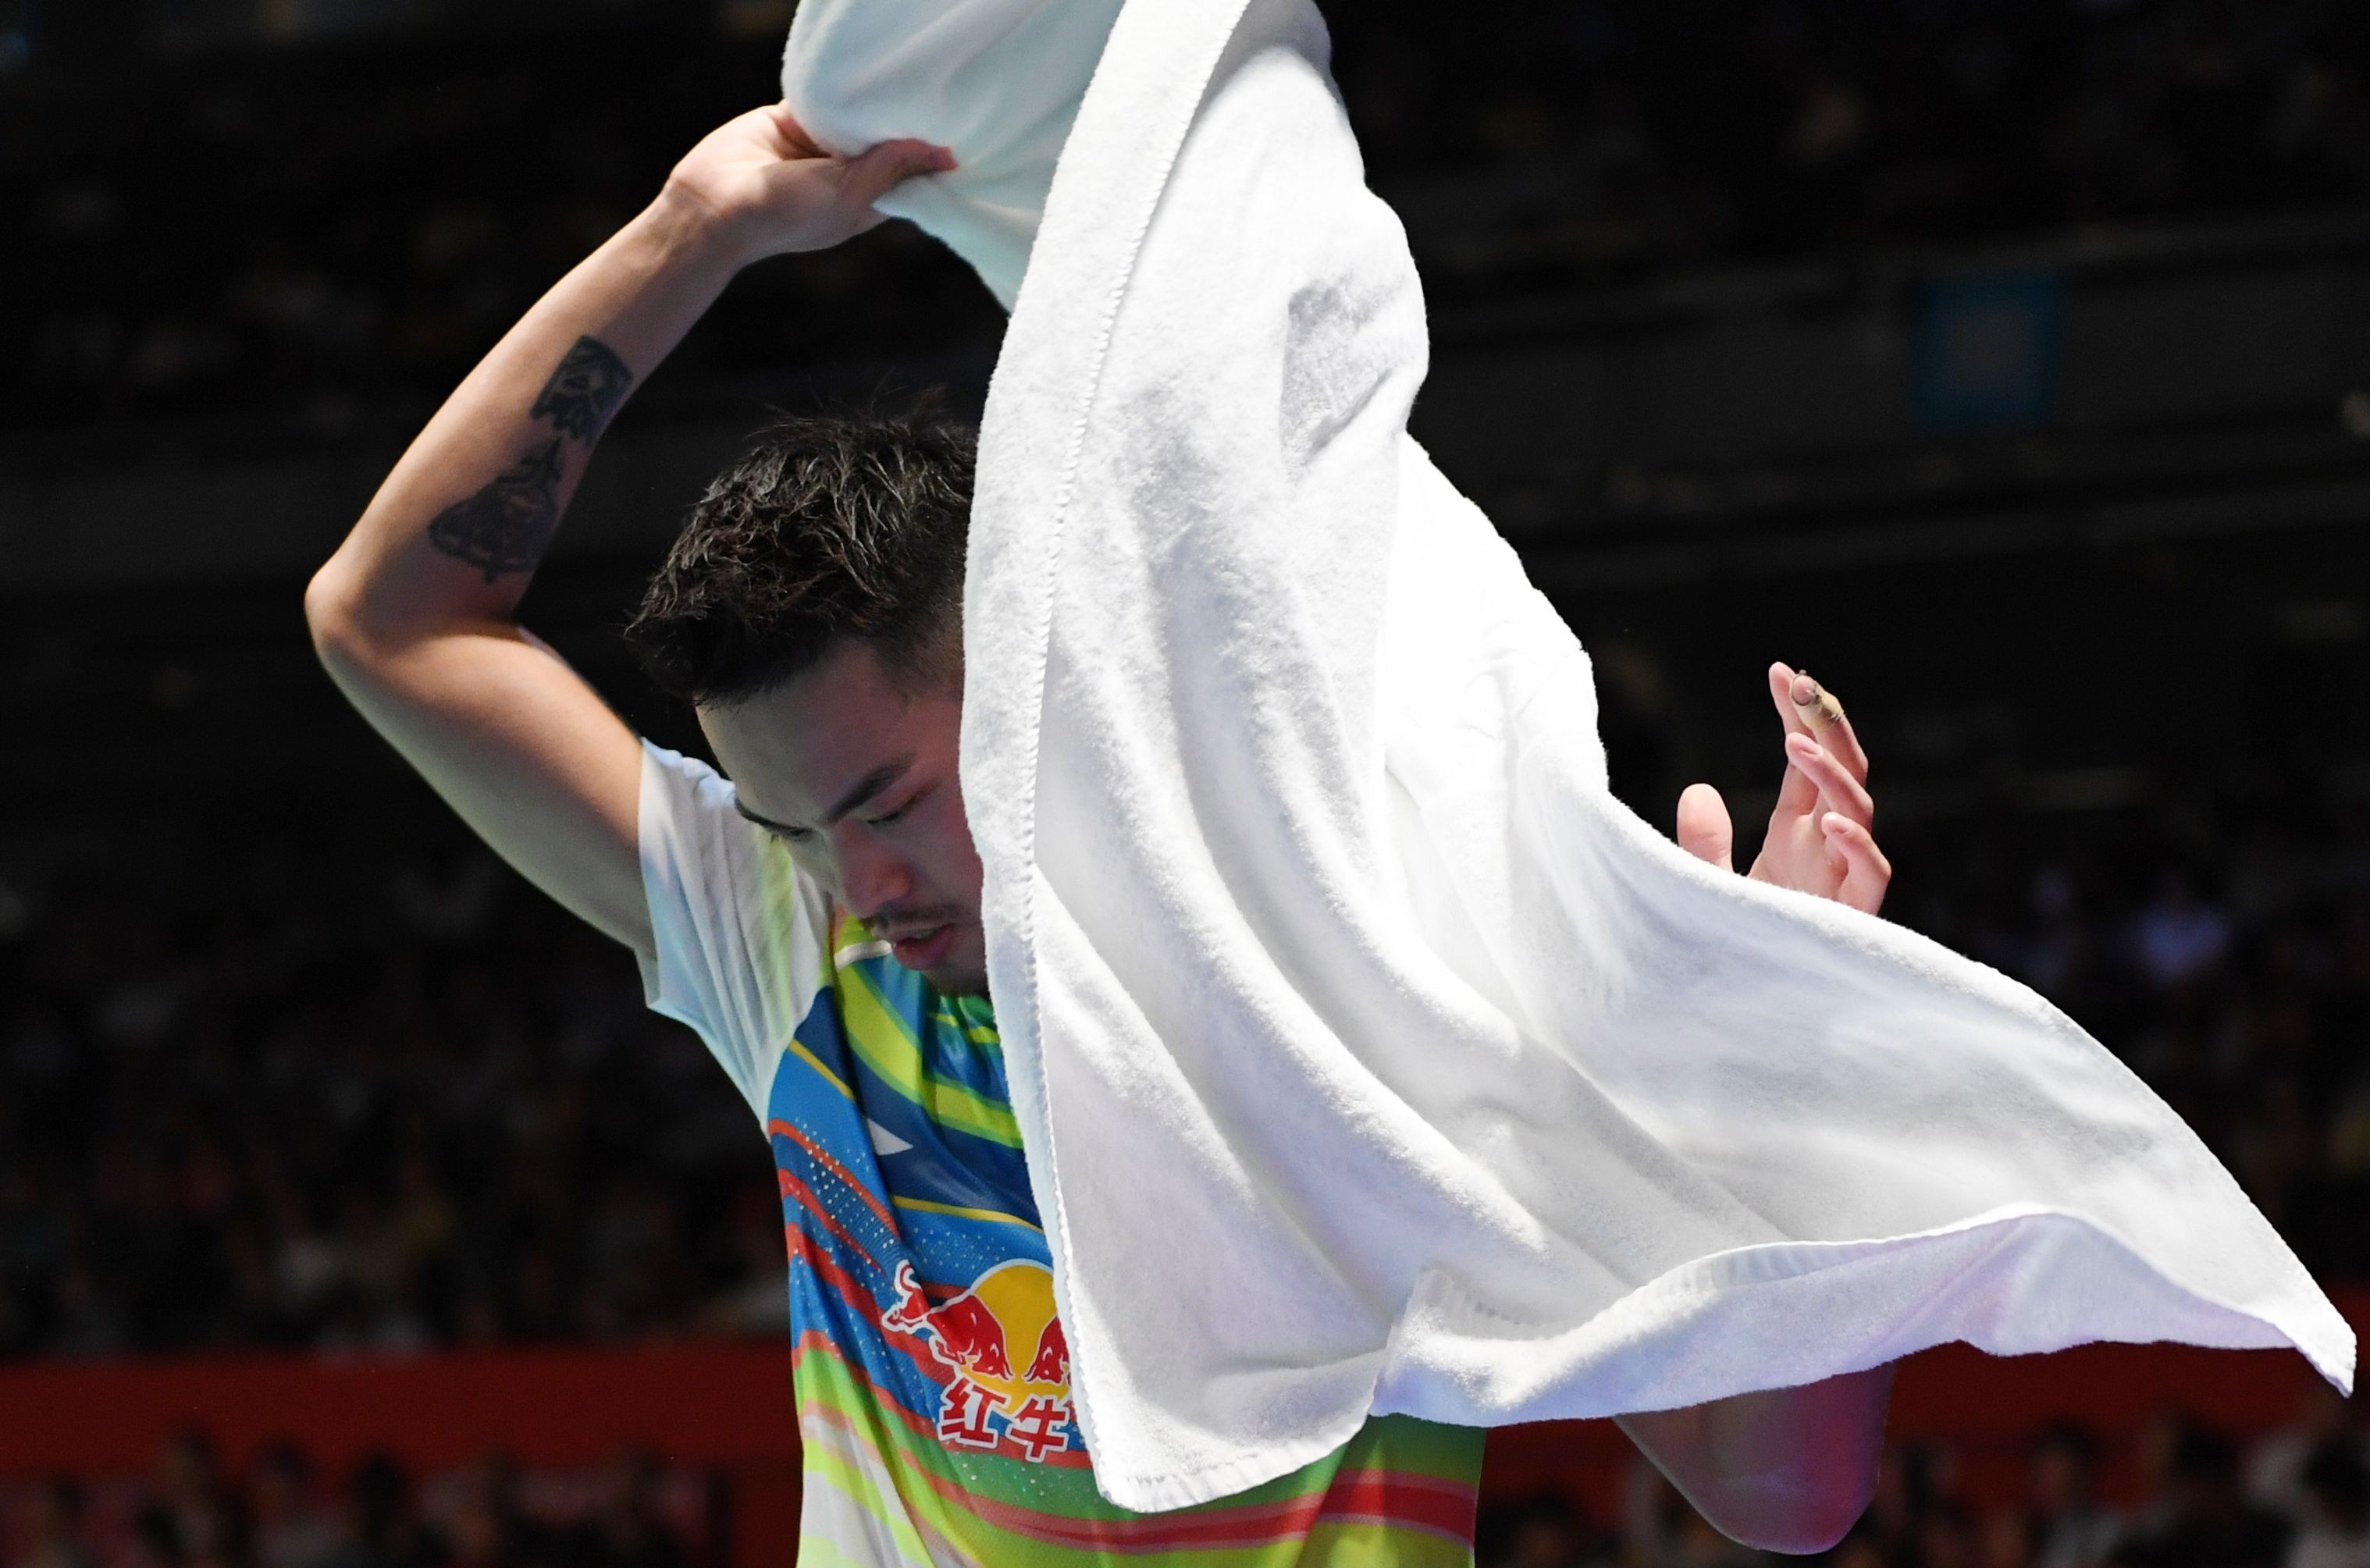 Sweet surrender: China’s Lin Dan wraps himself with a towel during his quarter-final match against South Korea’s Son Wan-ho at the Japan Open. Photo: AFP